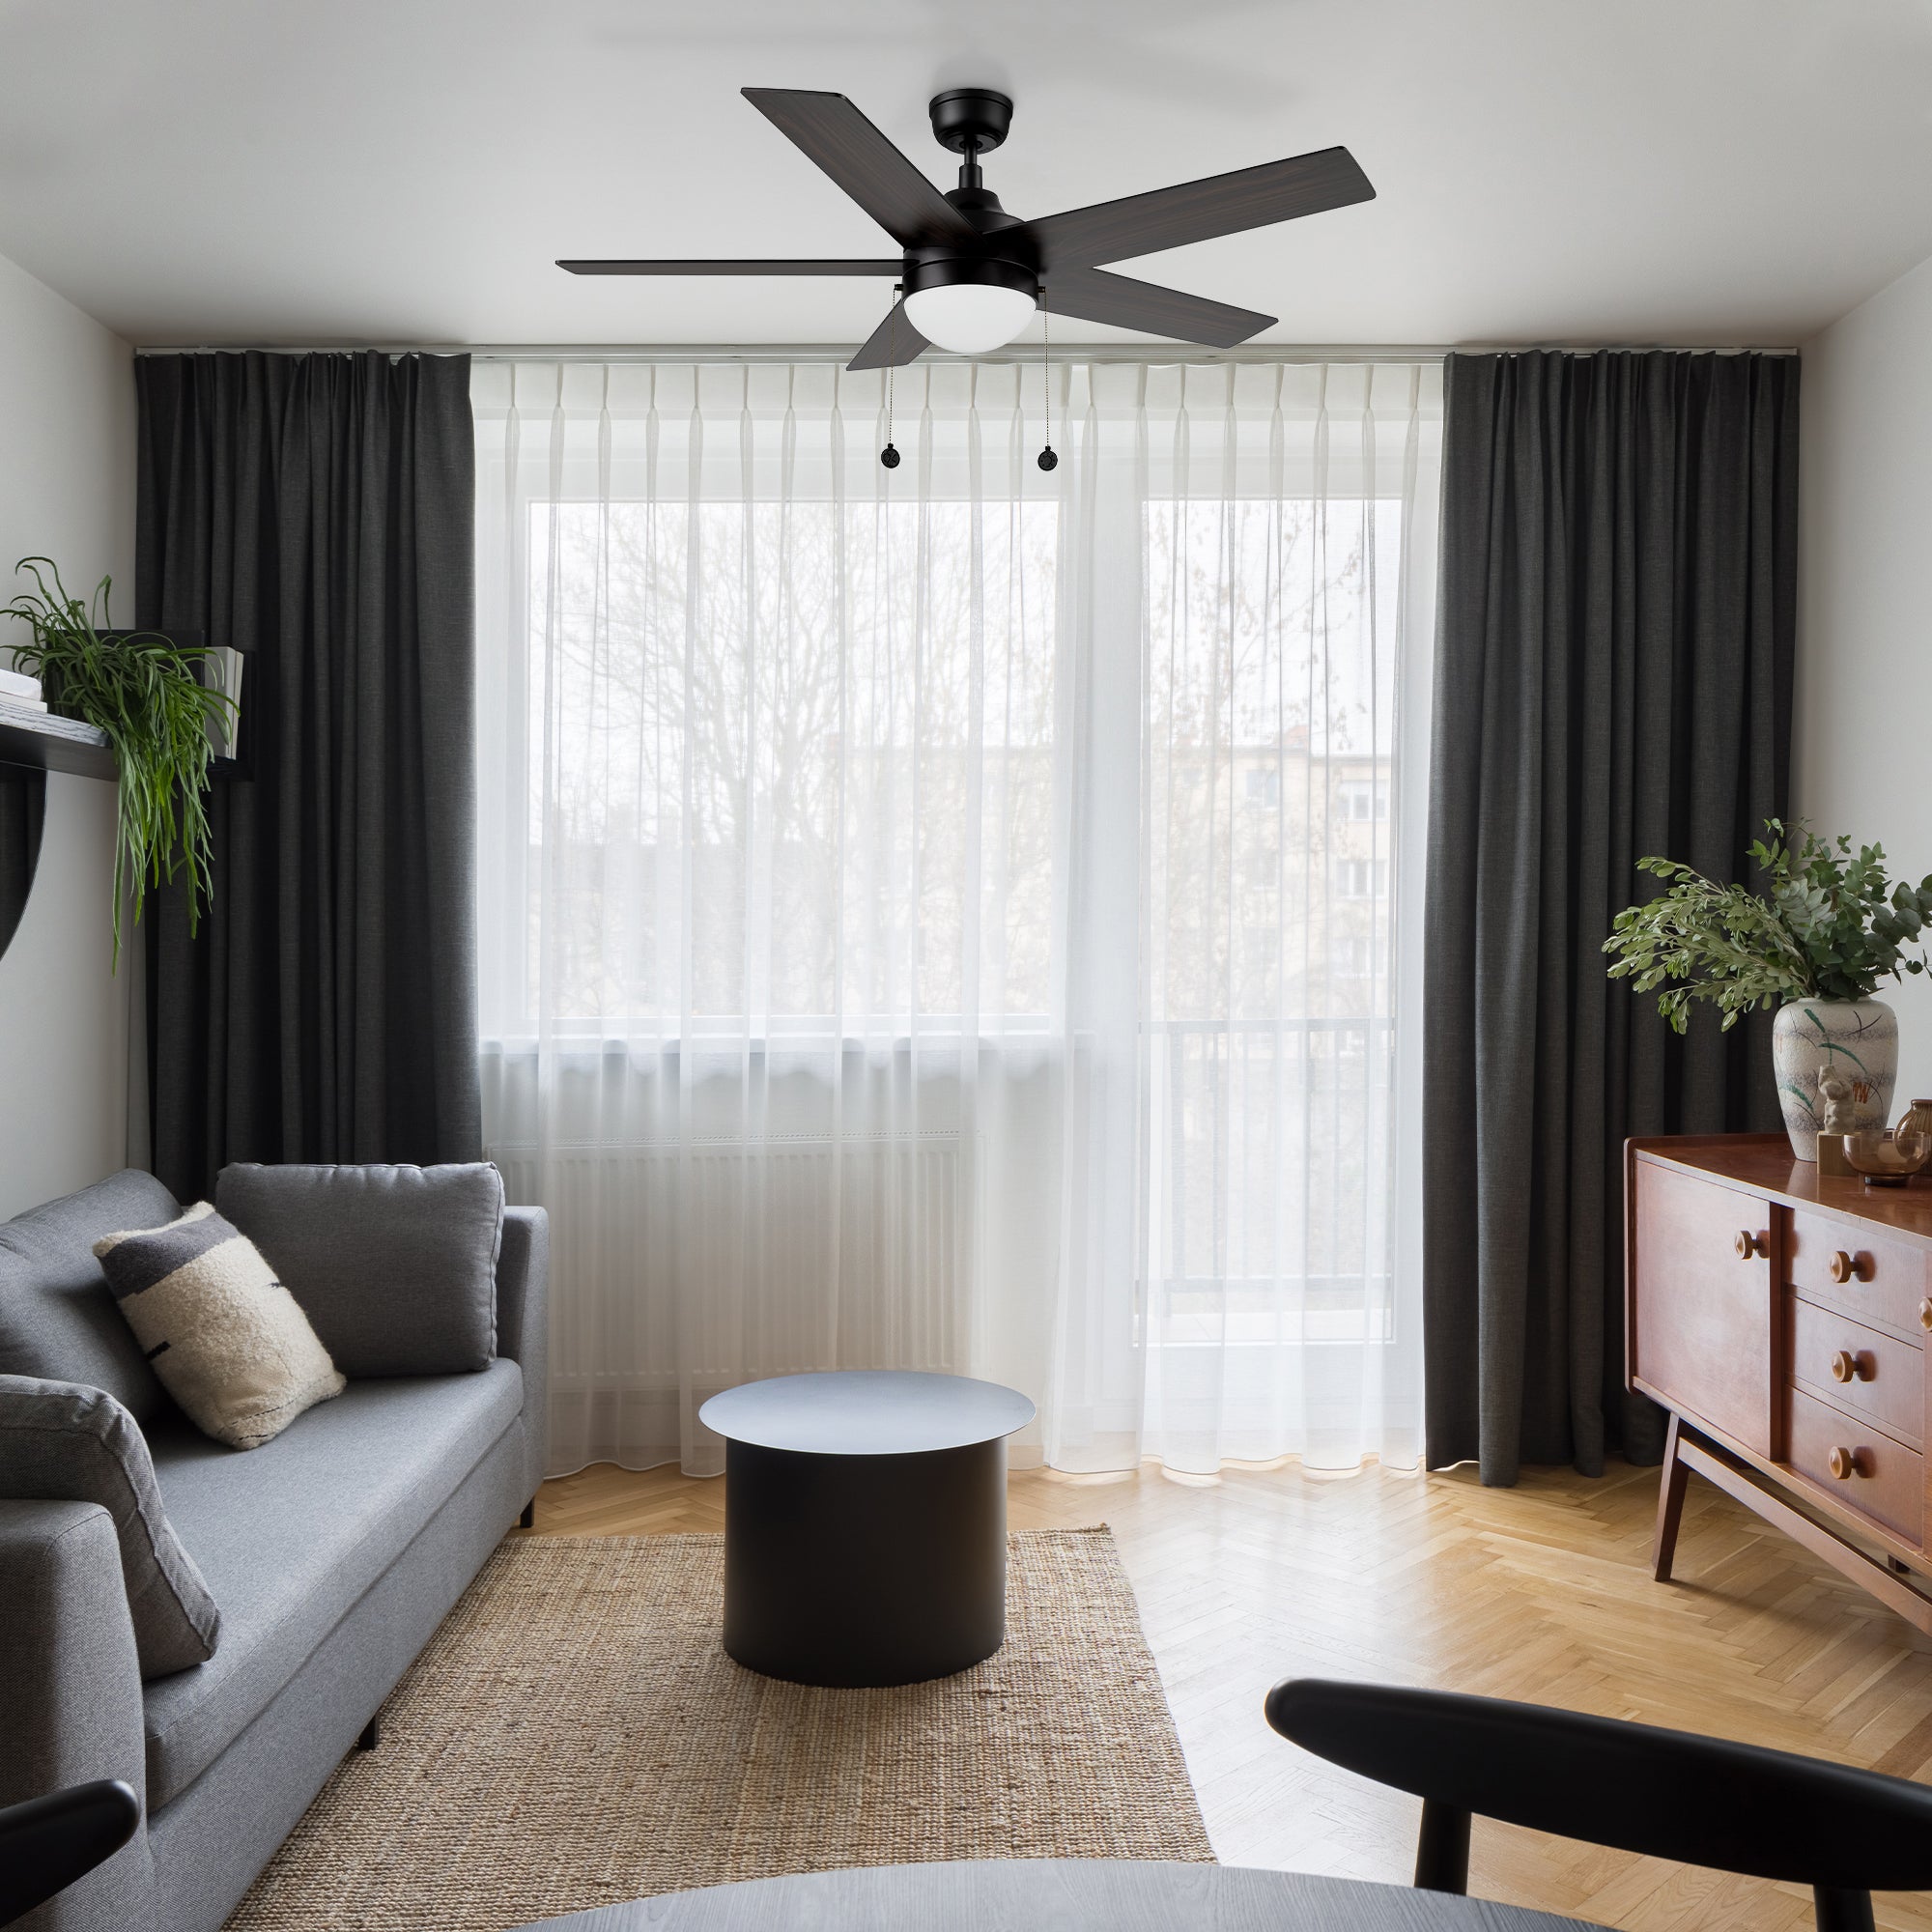 5 speed Quiet DC motor ceiling fan in black matches well with the long floor curtains in the modern living room. 